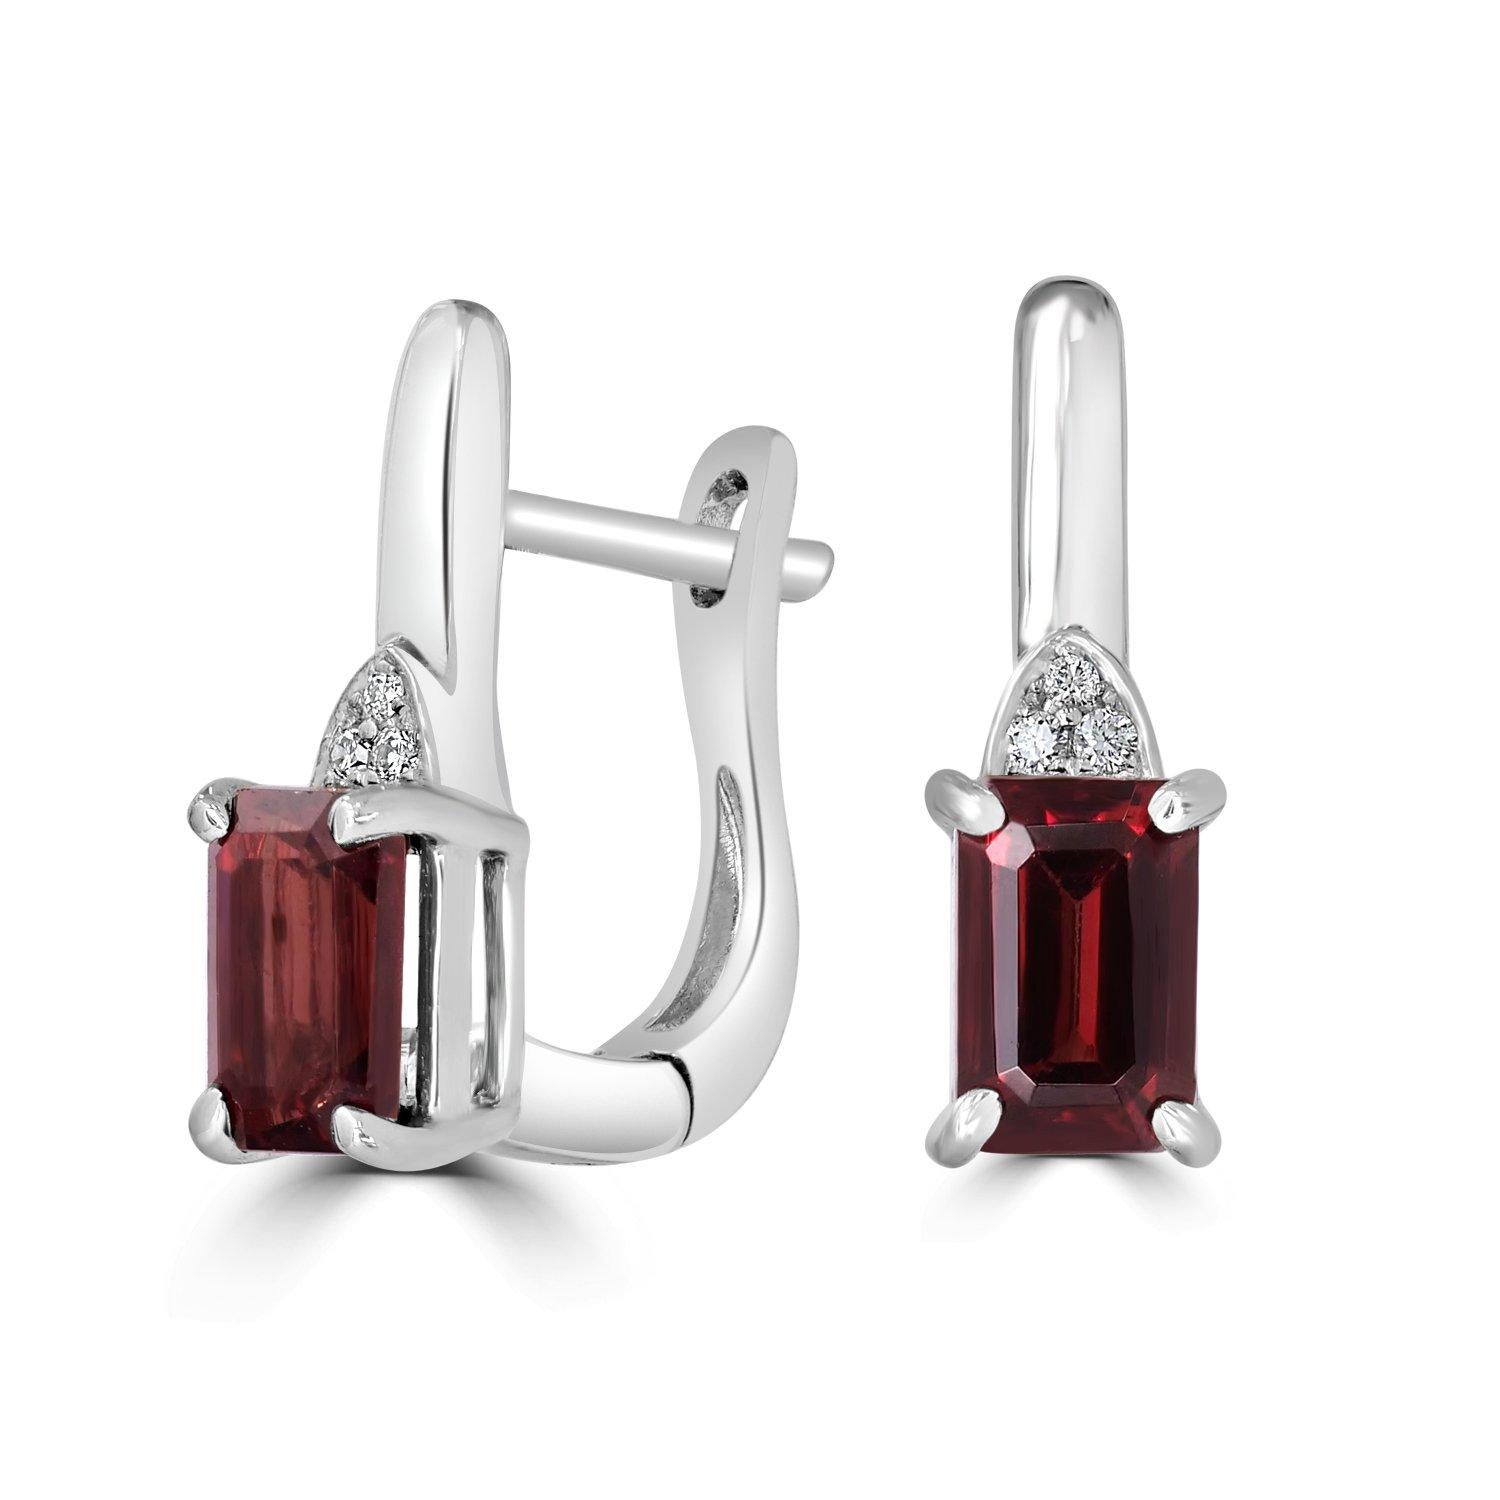 These 14K white gold earrings are set with an emerald-cut cut Garnet and bordered by splendid round Diamonds that will dazzle everyone!

3.3Tct Garnet Earrings
0.03Tct Diamonds Set
14k White Gold